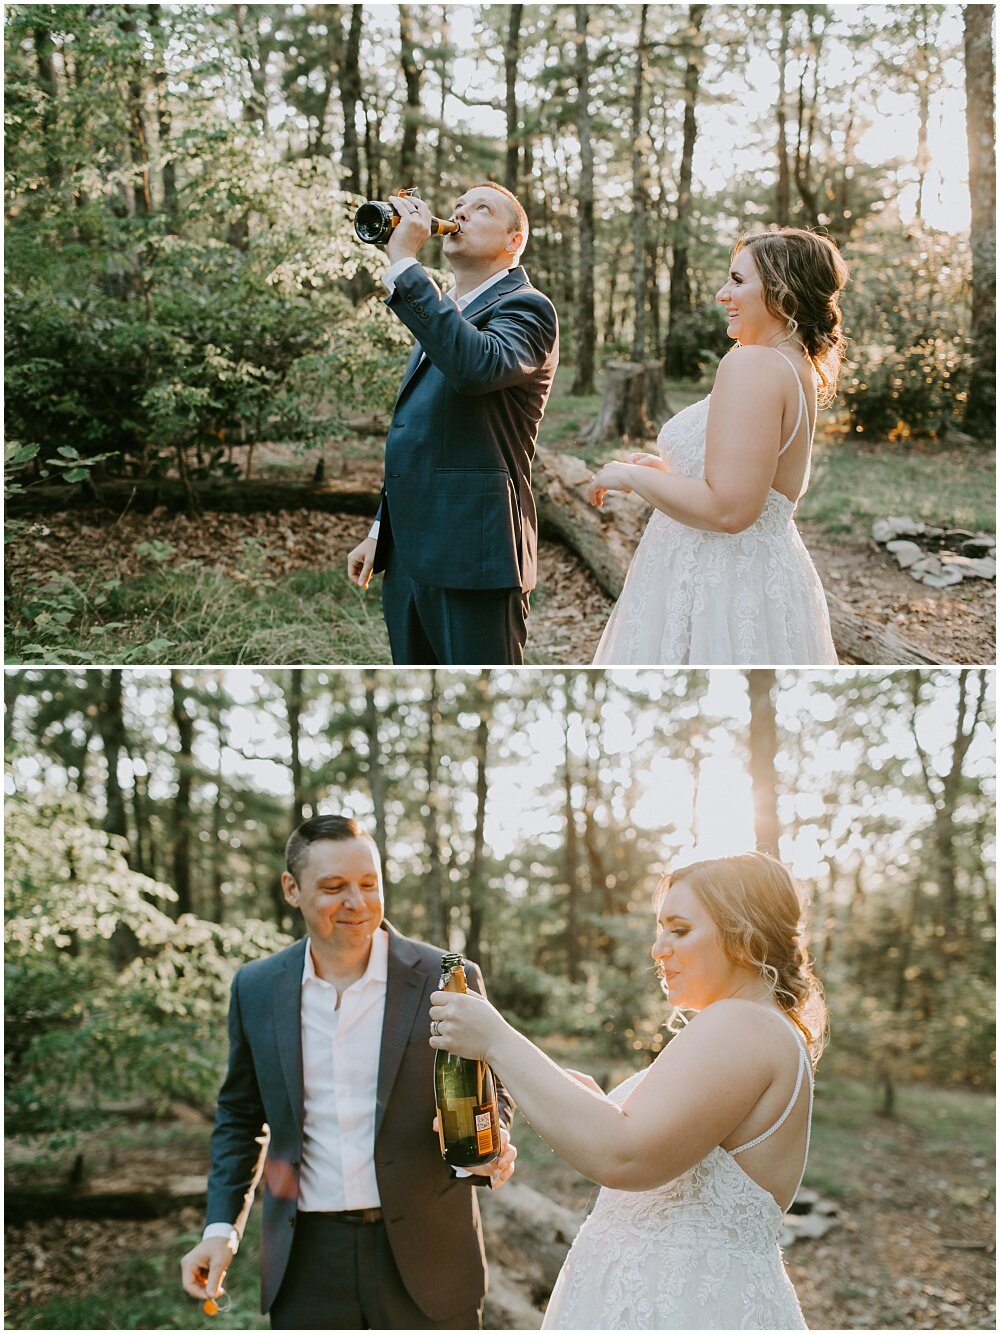 Bride and groom share a drink to celebrate.